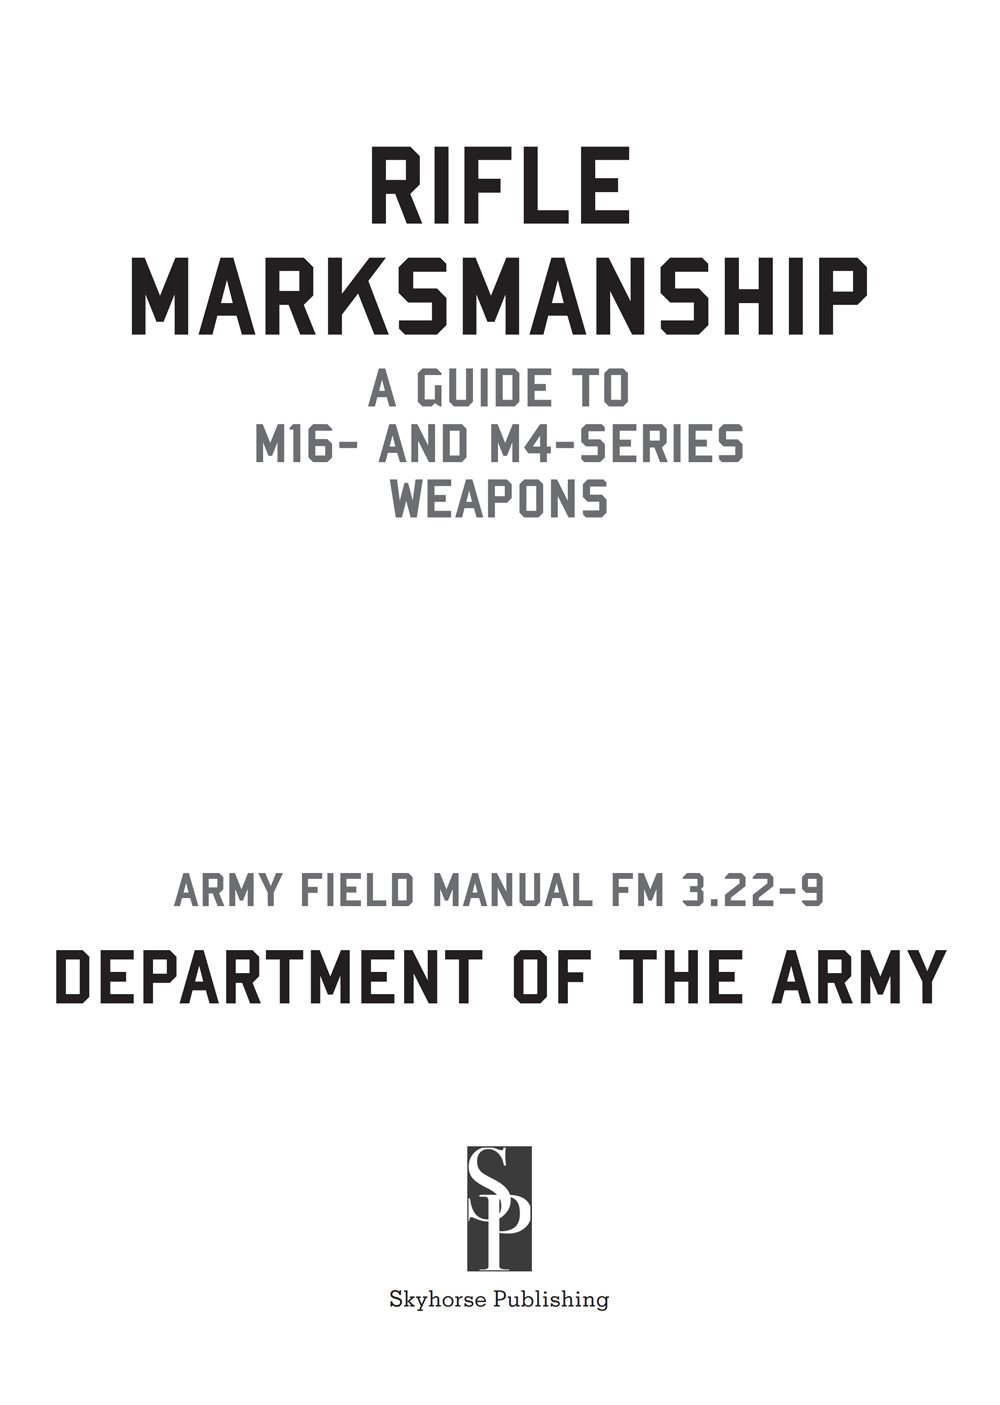 First Published by the Department of the Army in 2011 First Skyhorse edition - photo 2